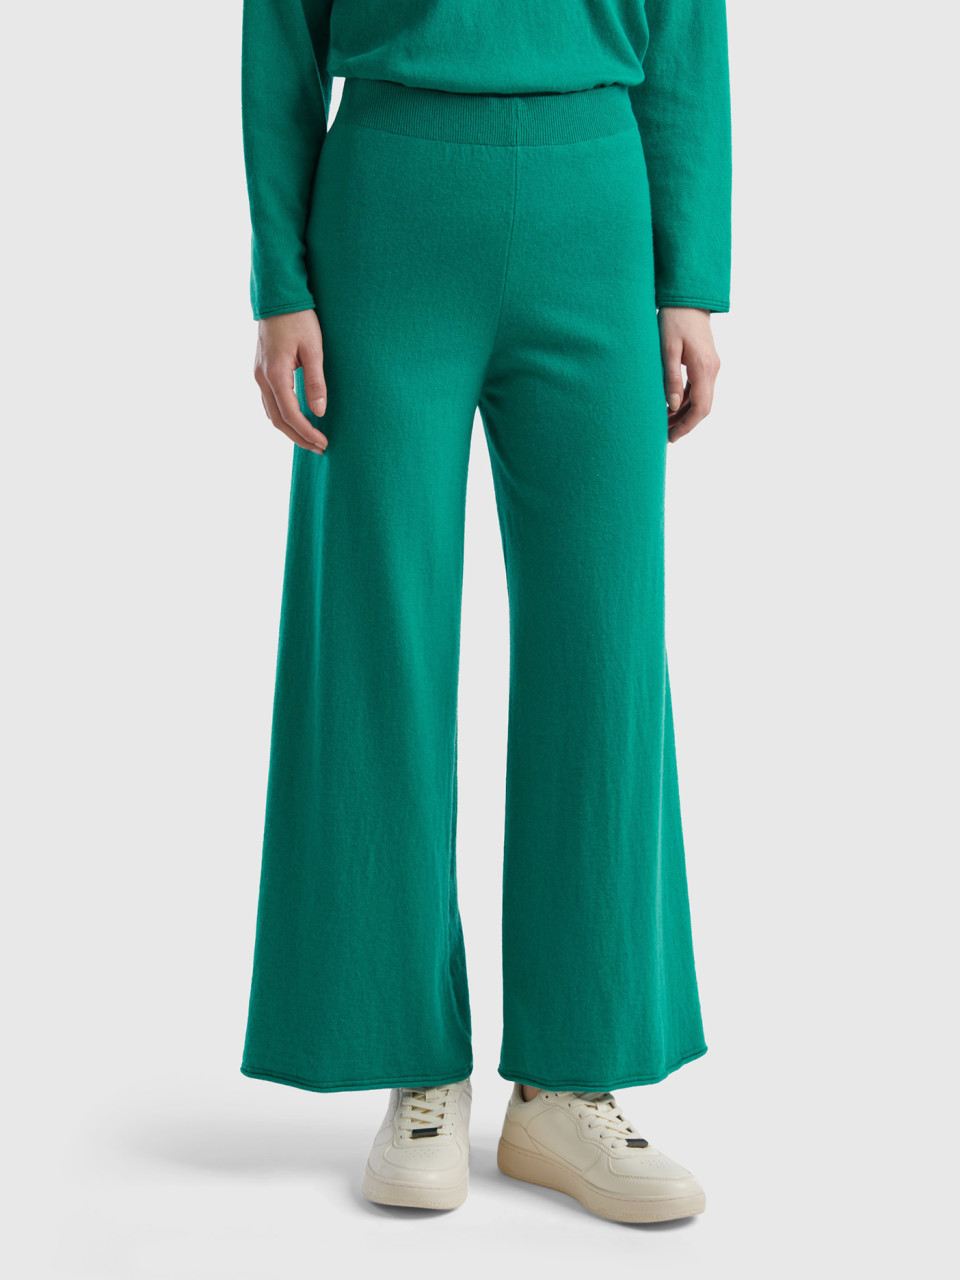 Benetton, Wide Water Green Trousers In Wool And Cashmere Blend, Green, Women